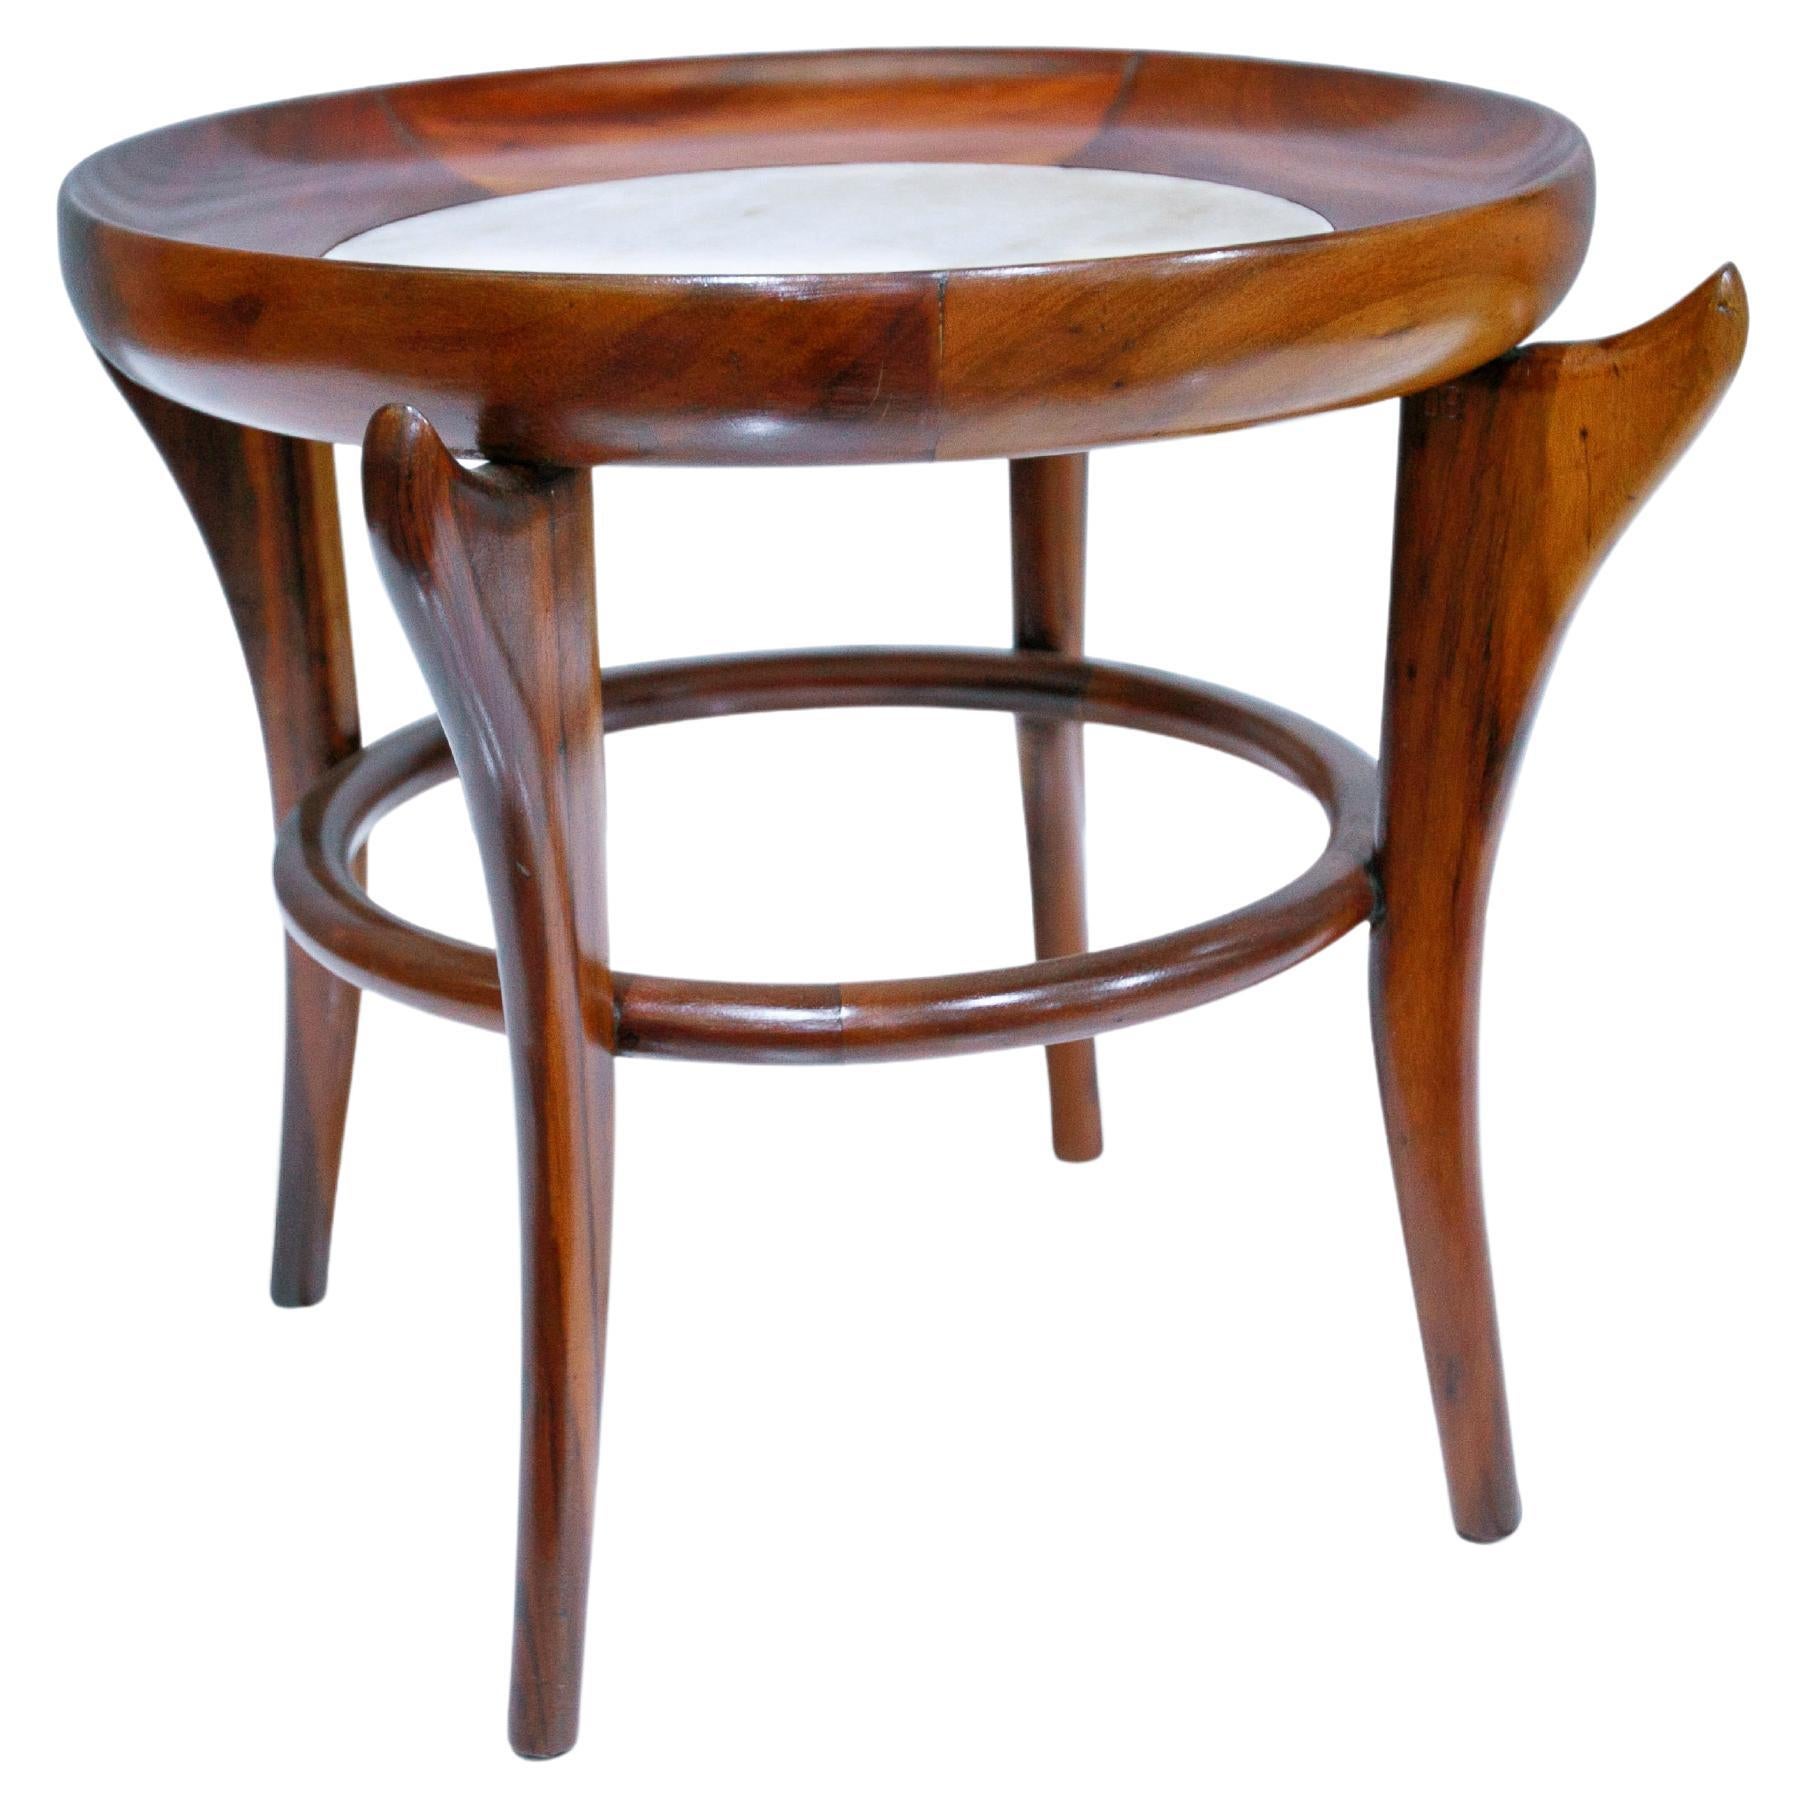 Available today, Giuseppe Scapinelli’s iconic Maracanã coffee table is made of Brazilian Rosewood, known as Jacaranda and marble. The top has a circular wood base that holds the marble, giving a futuristic look when seen from above. The four curved